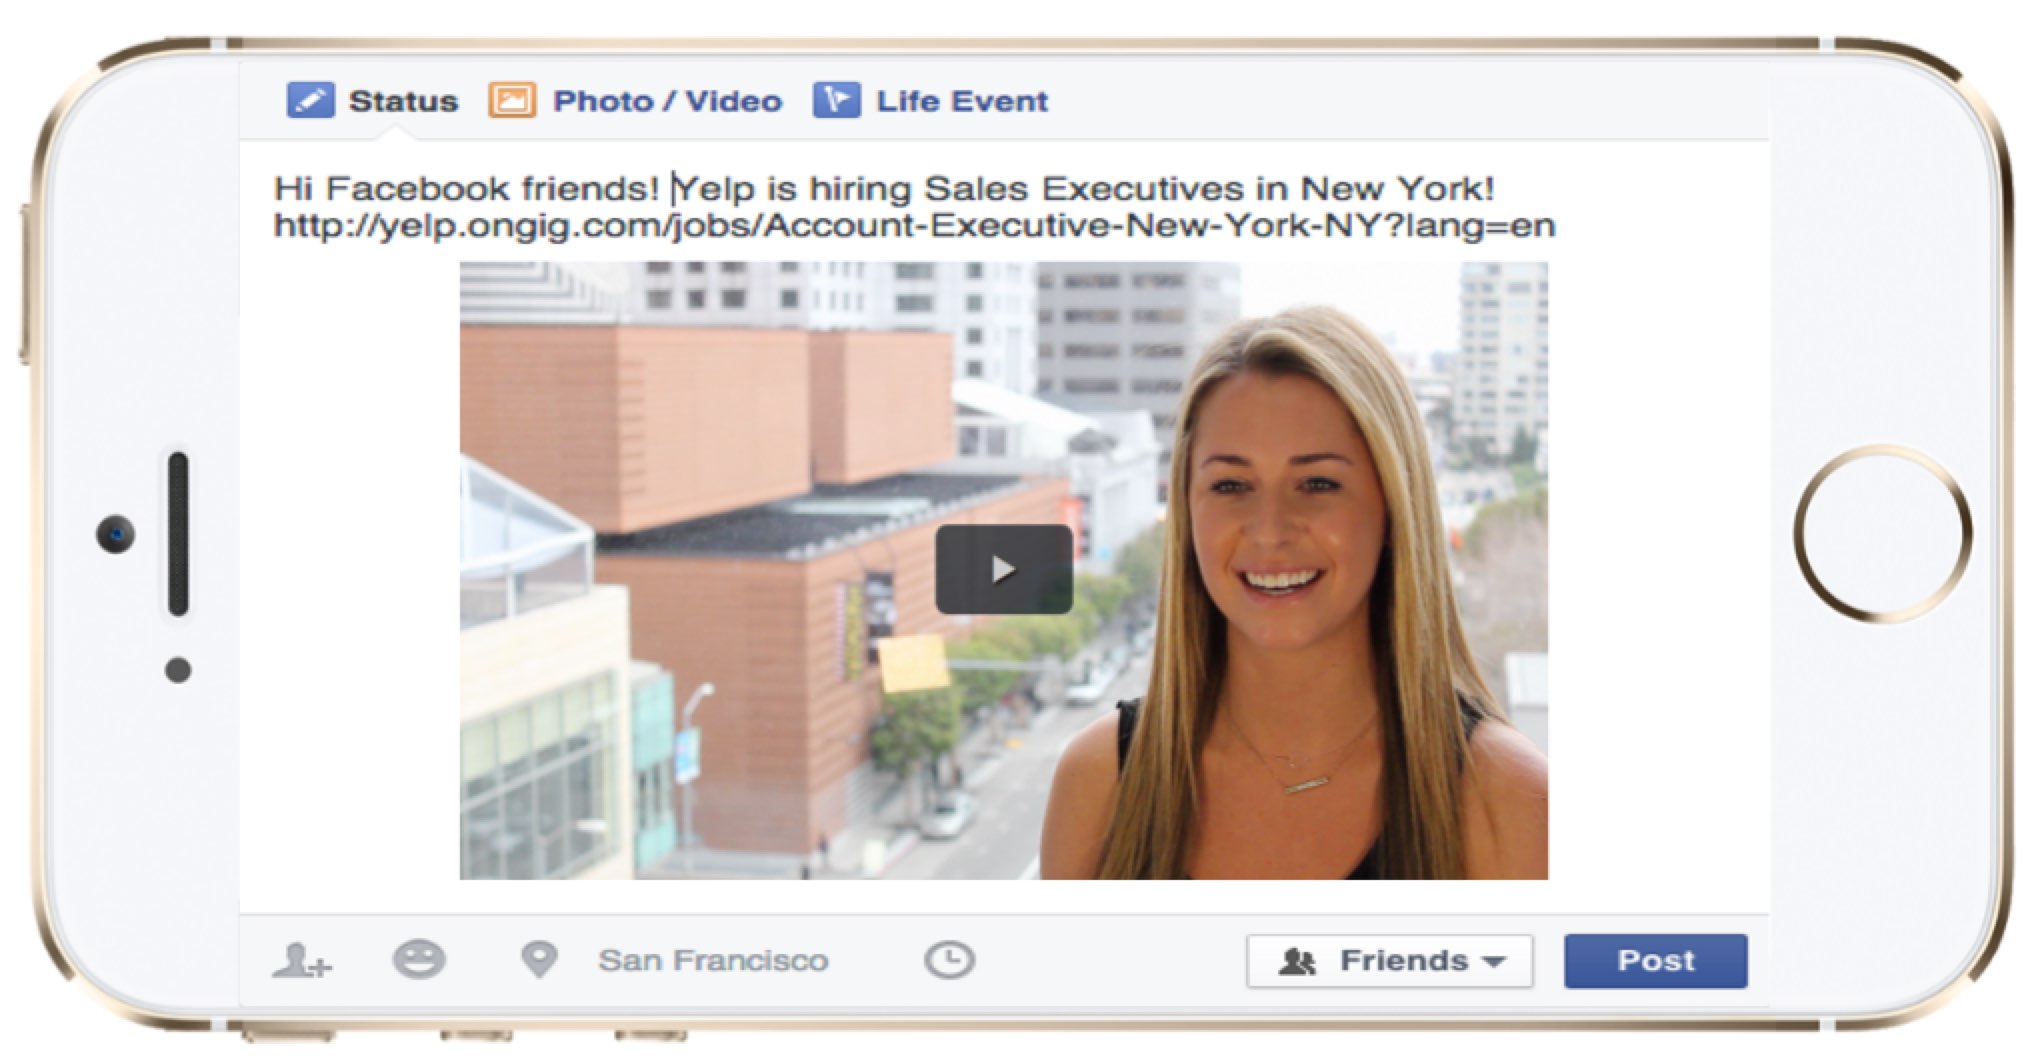 Social Recruiting the-news-feed-effect-to-build-pipeline-through-facebook-social-sharing